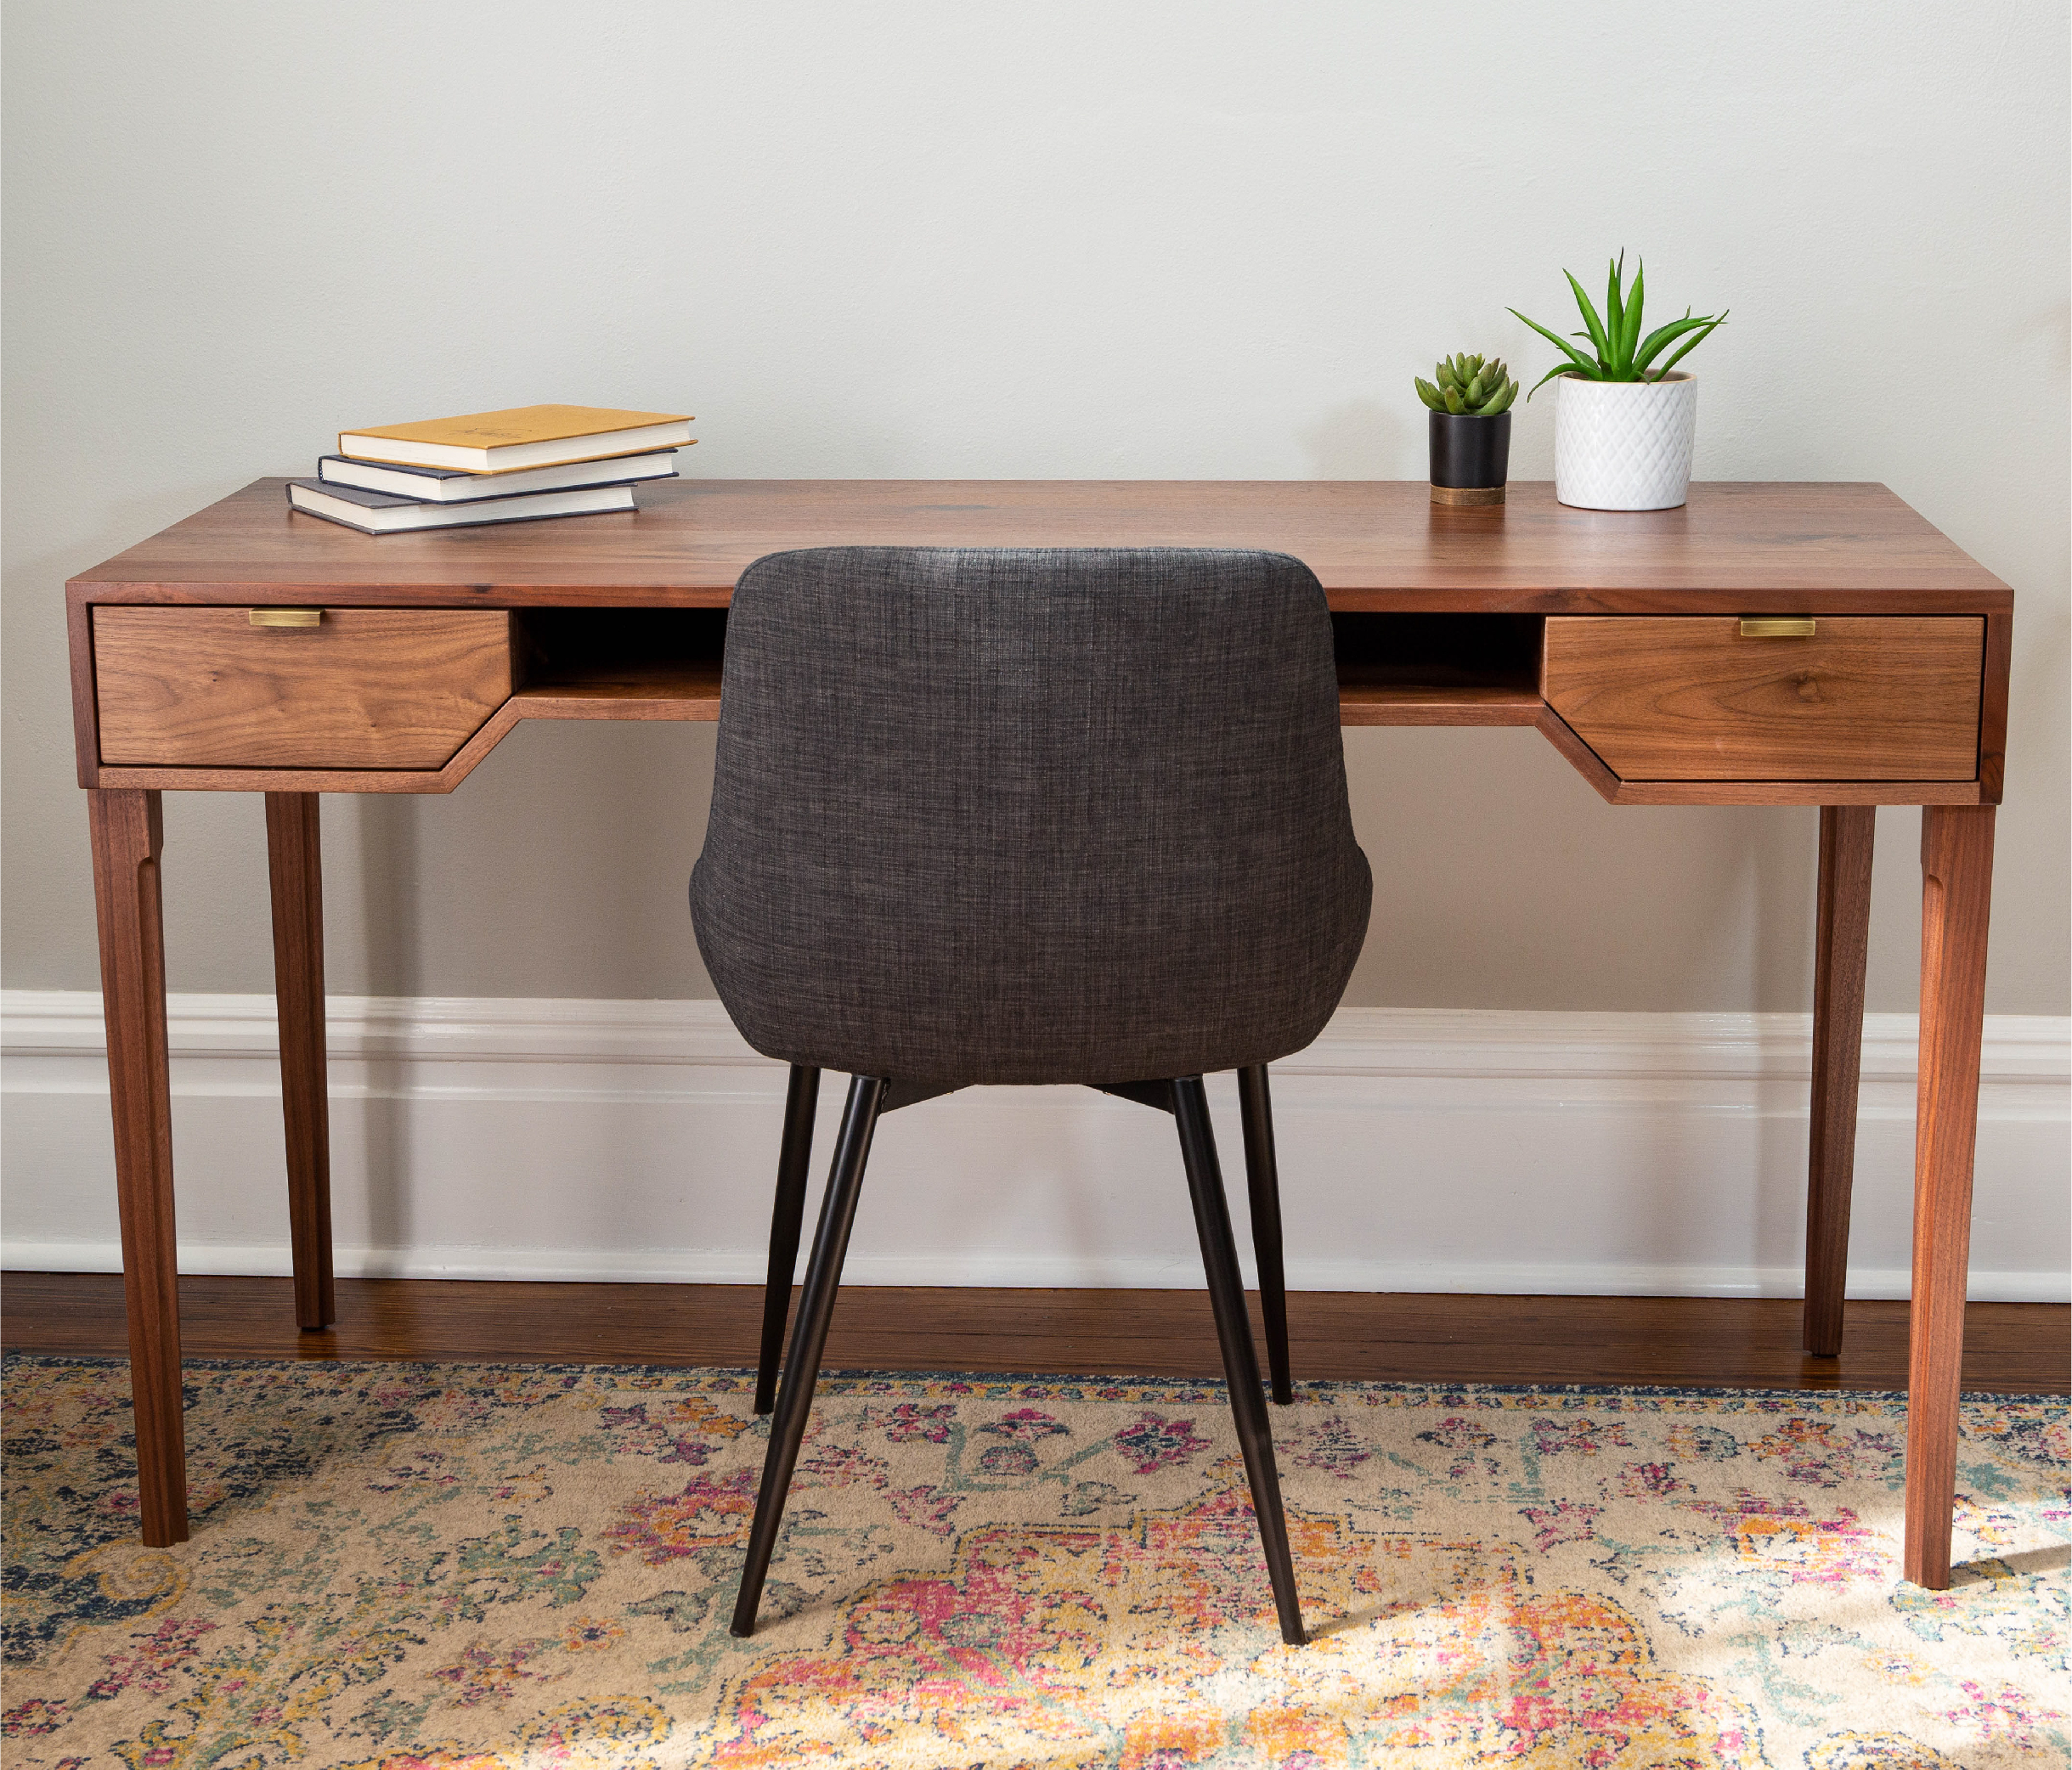 The Caraway Desk Product Image